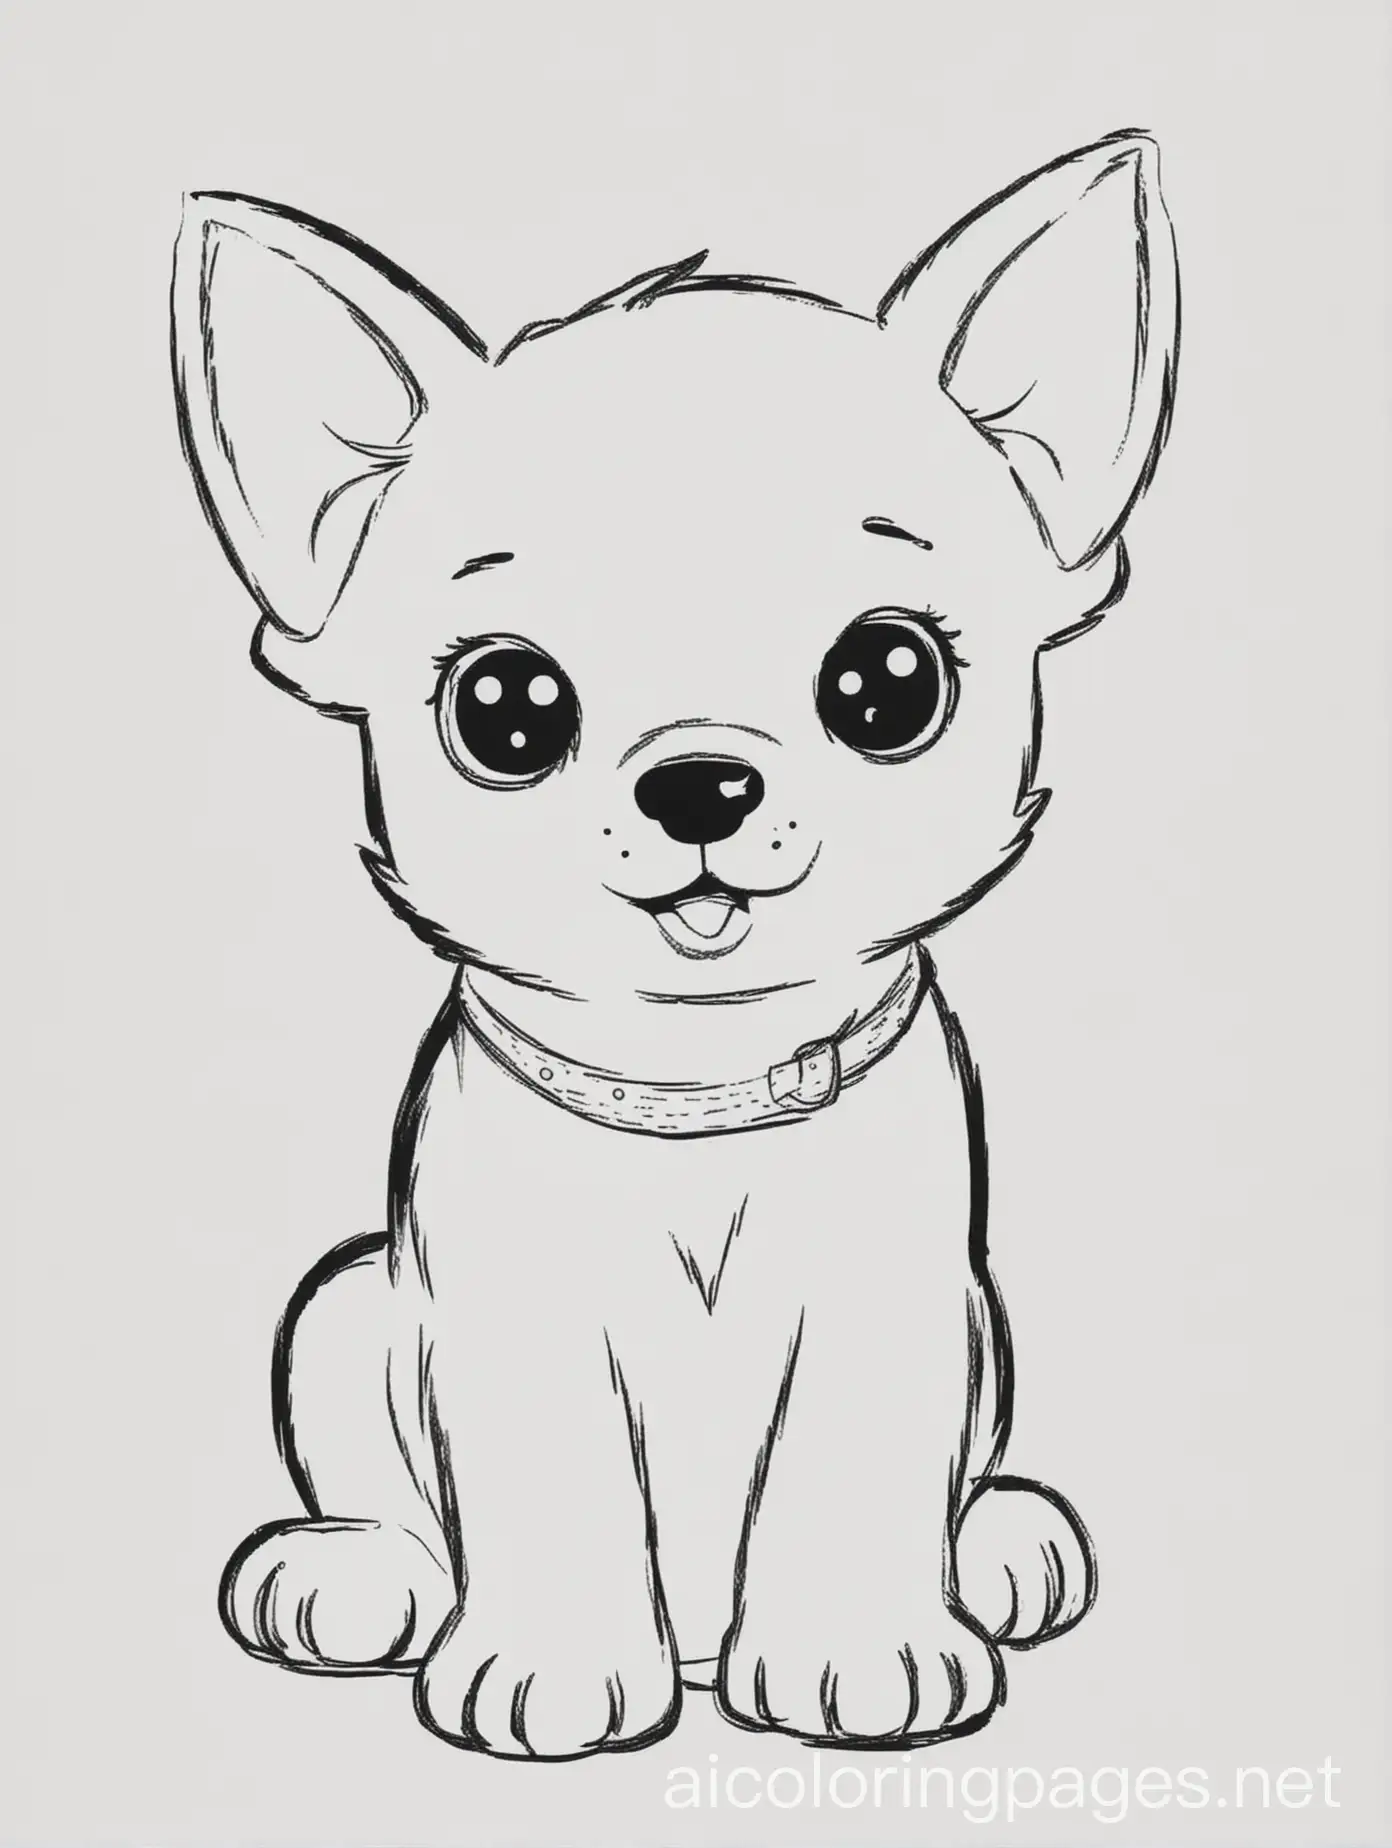 Cute dog, Coloring Page, black and white, line art, white background, Simplicity, Ample White Space. The background of the coloring page is plain white to make it easy for young children to color within the lines. The outlines of all the subjects are easy to distinguish, making it simple for kids to color without too much difficulty